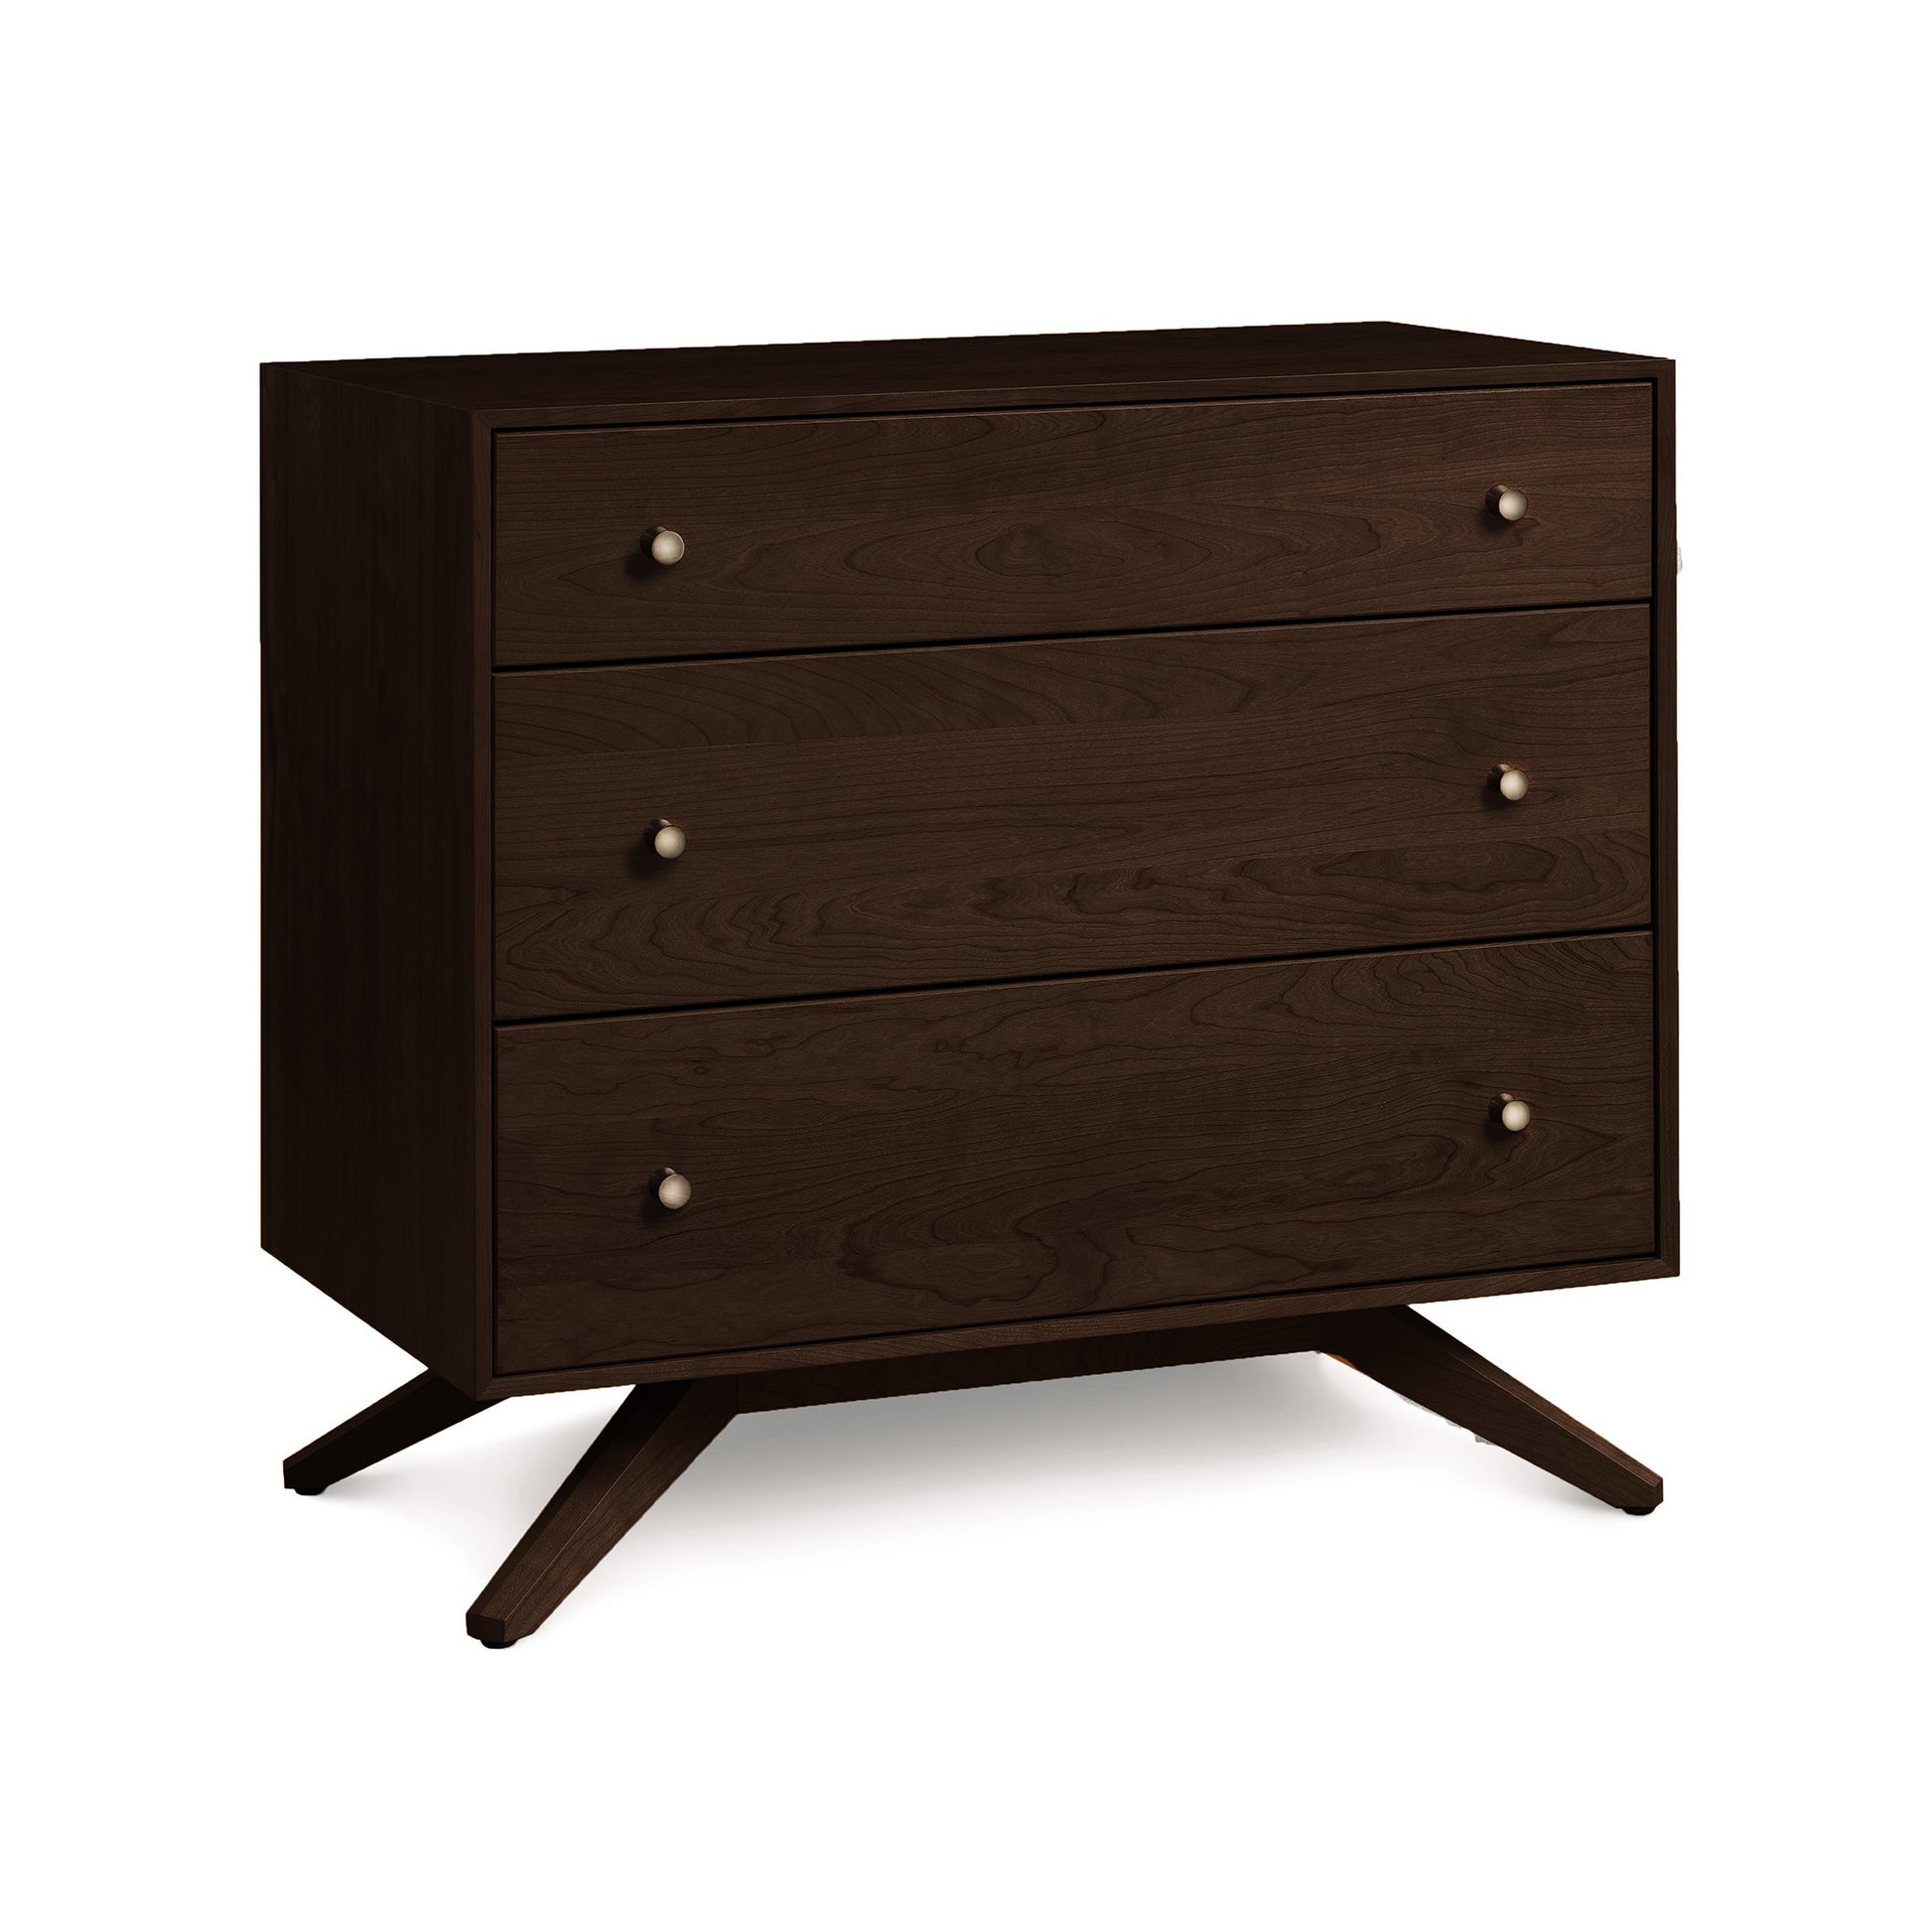 The sustainable hardwood Copeland Furniture Astrid 3-Drawer Chest is featured in a dark brown color, contrasting with the white background.